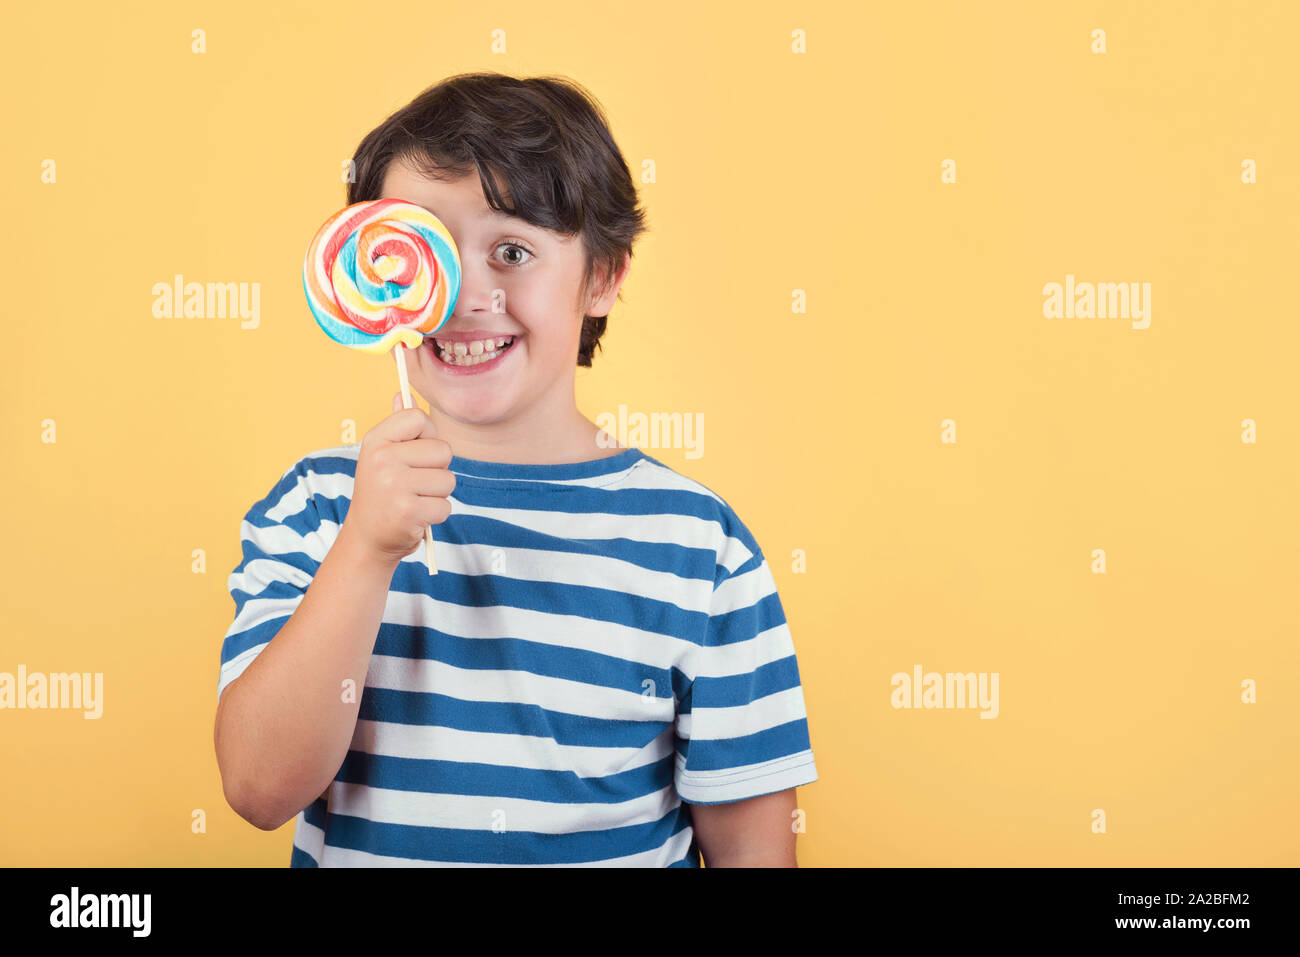 funny child covering eye with lollipop on yellow background Stock Photo